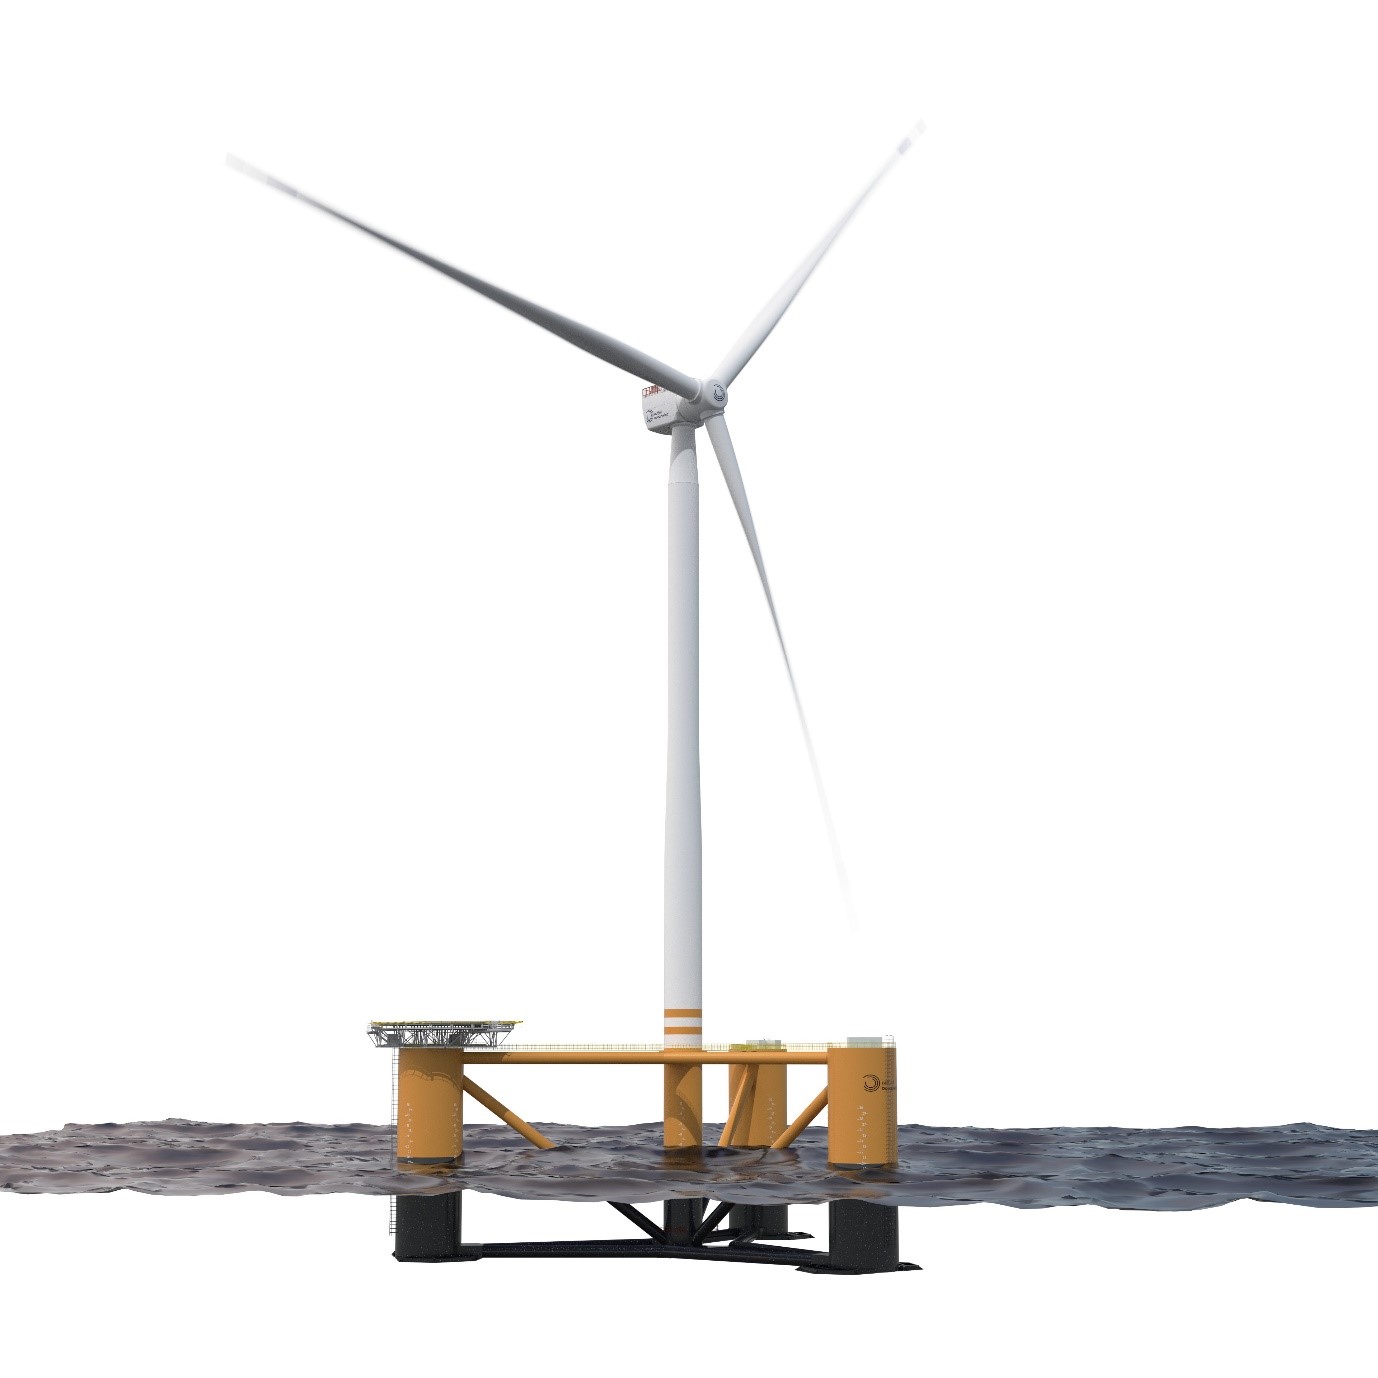 A picture containing windmill, outdoor object

Description automatically generated